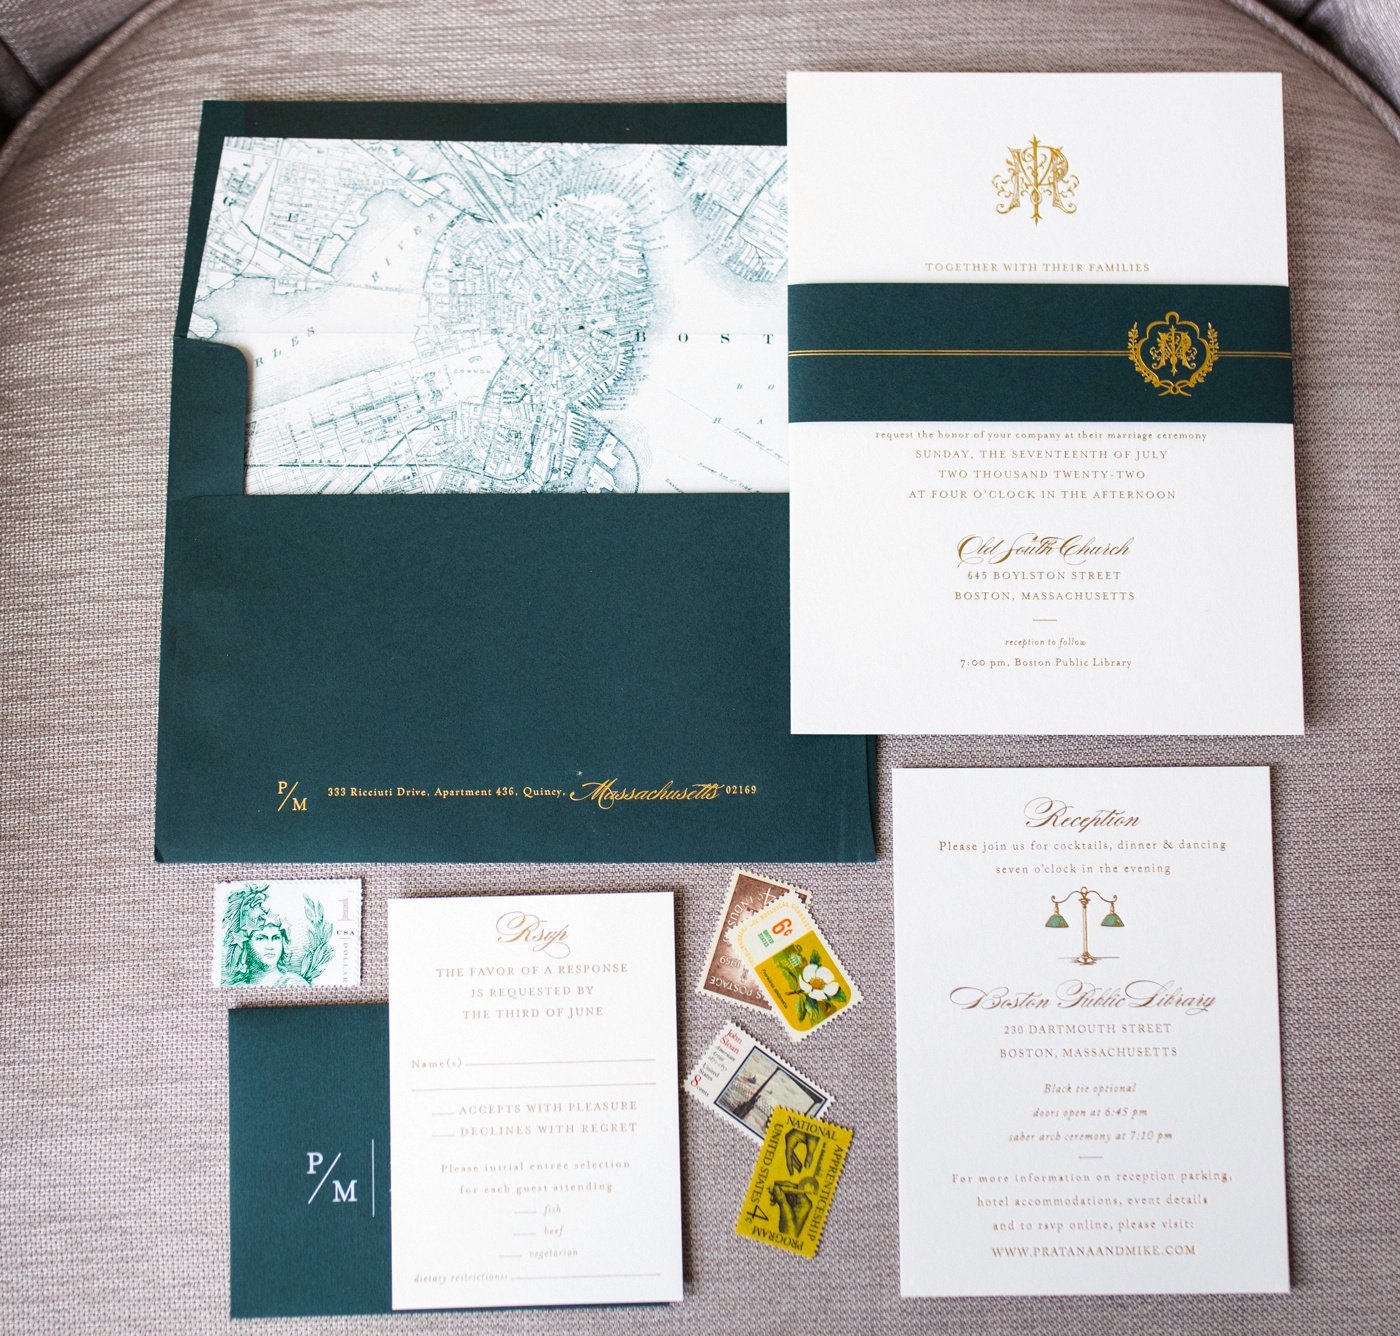 Flatlay of an invitation suite for a Boston wedding by The Fete Collection